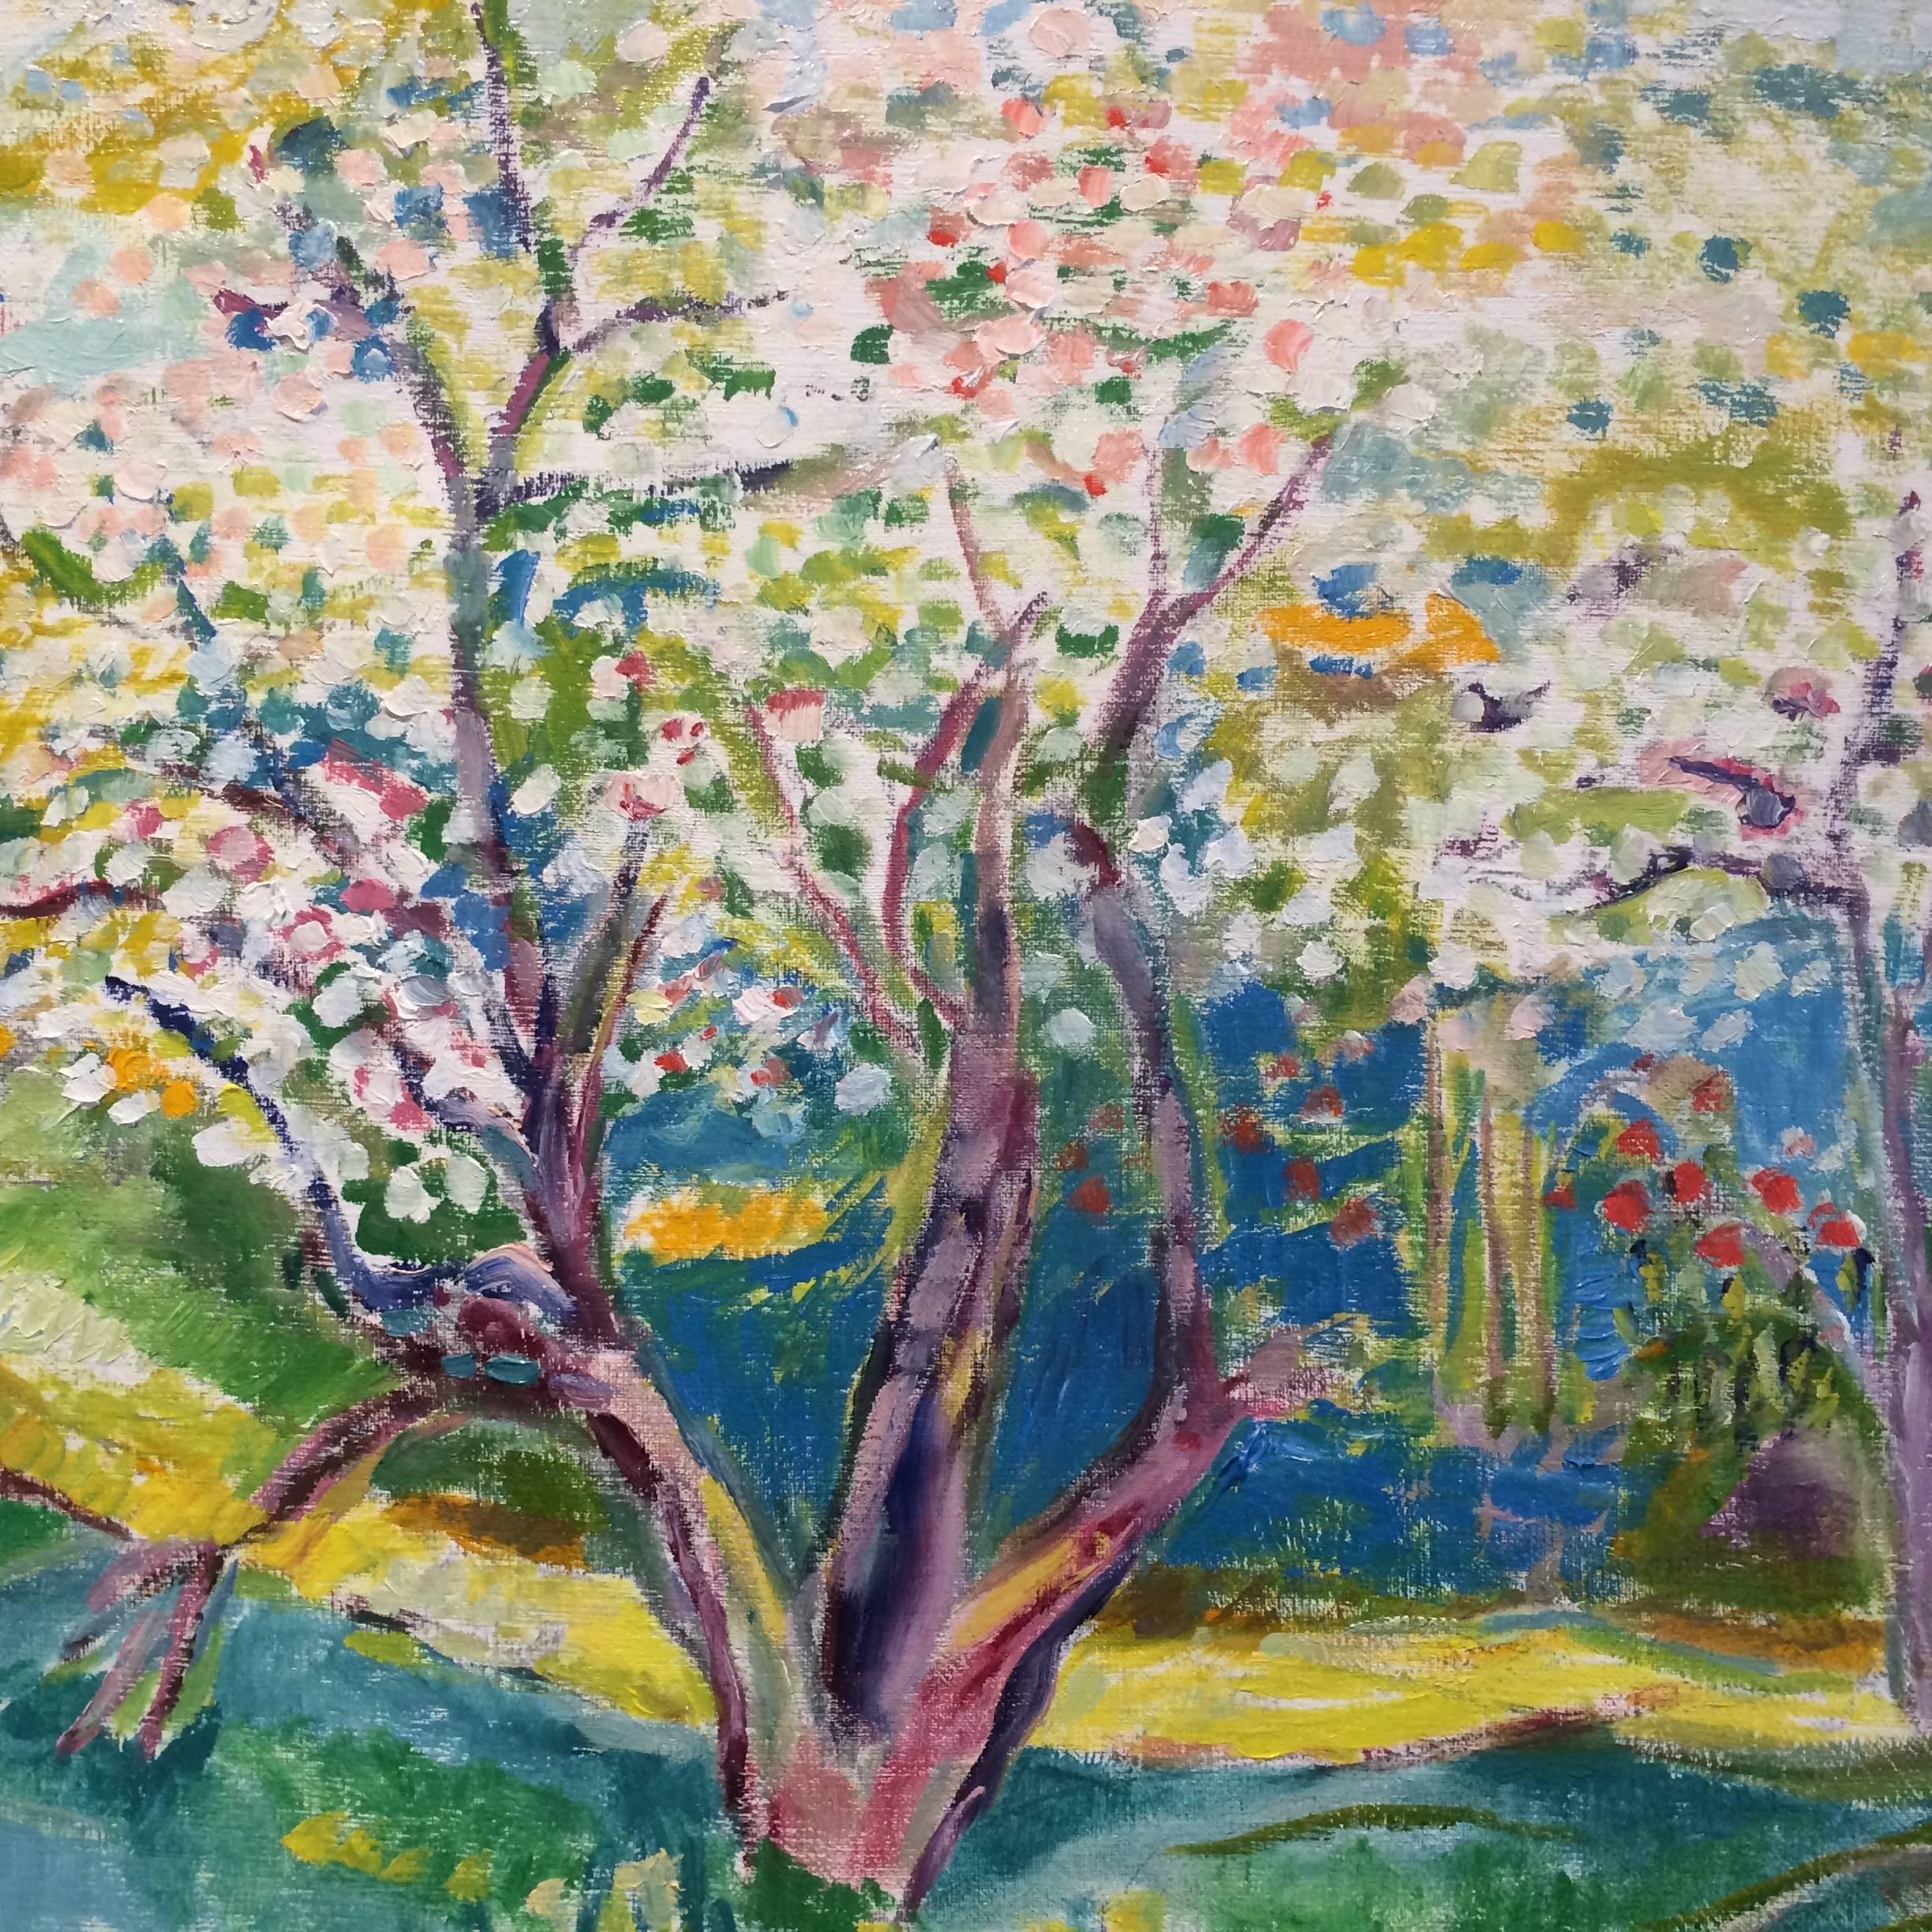 Landscape with trees in bloom. - Painting by Jehudith Sobel